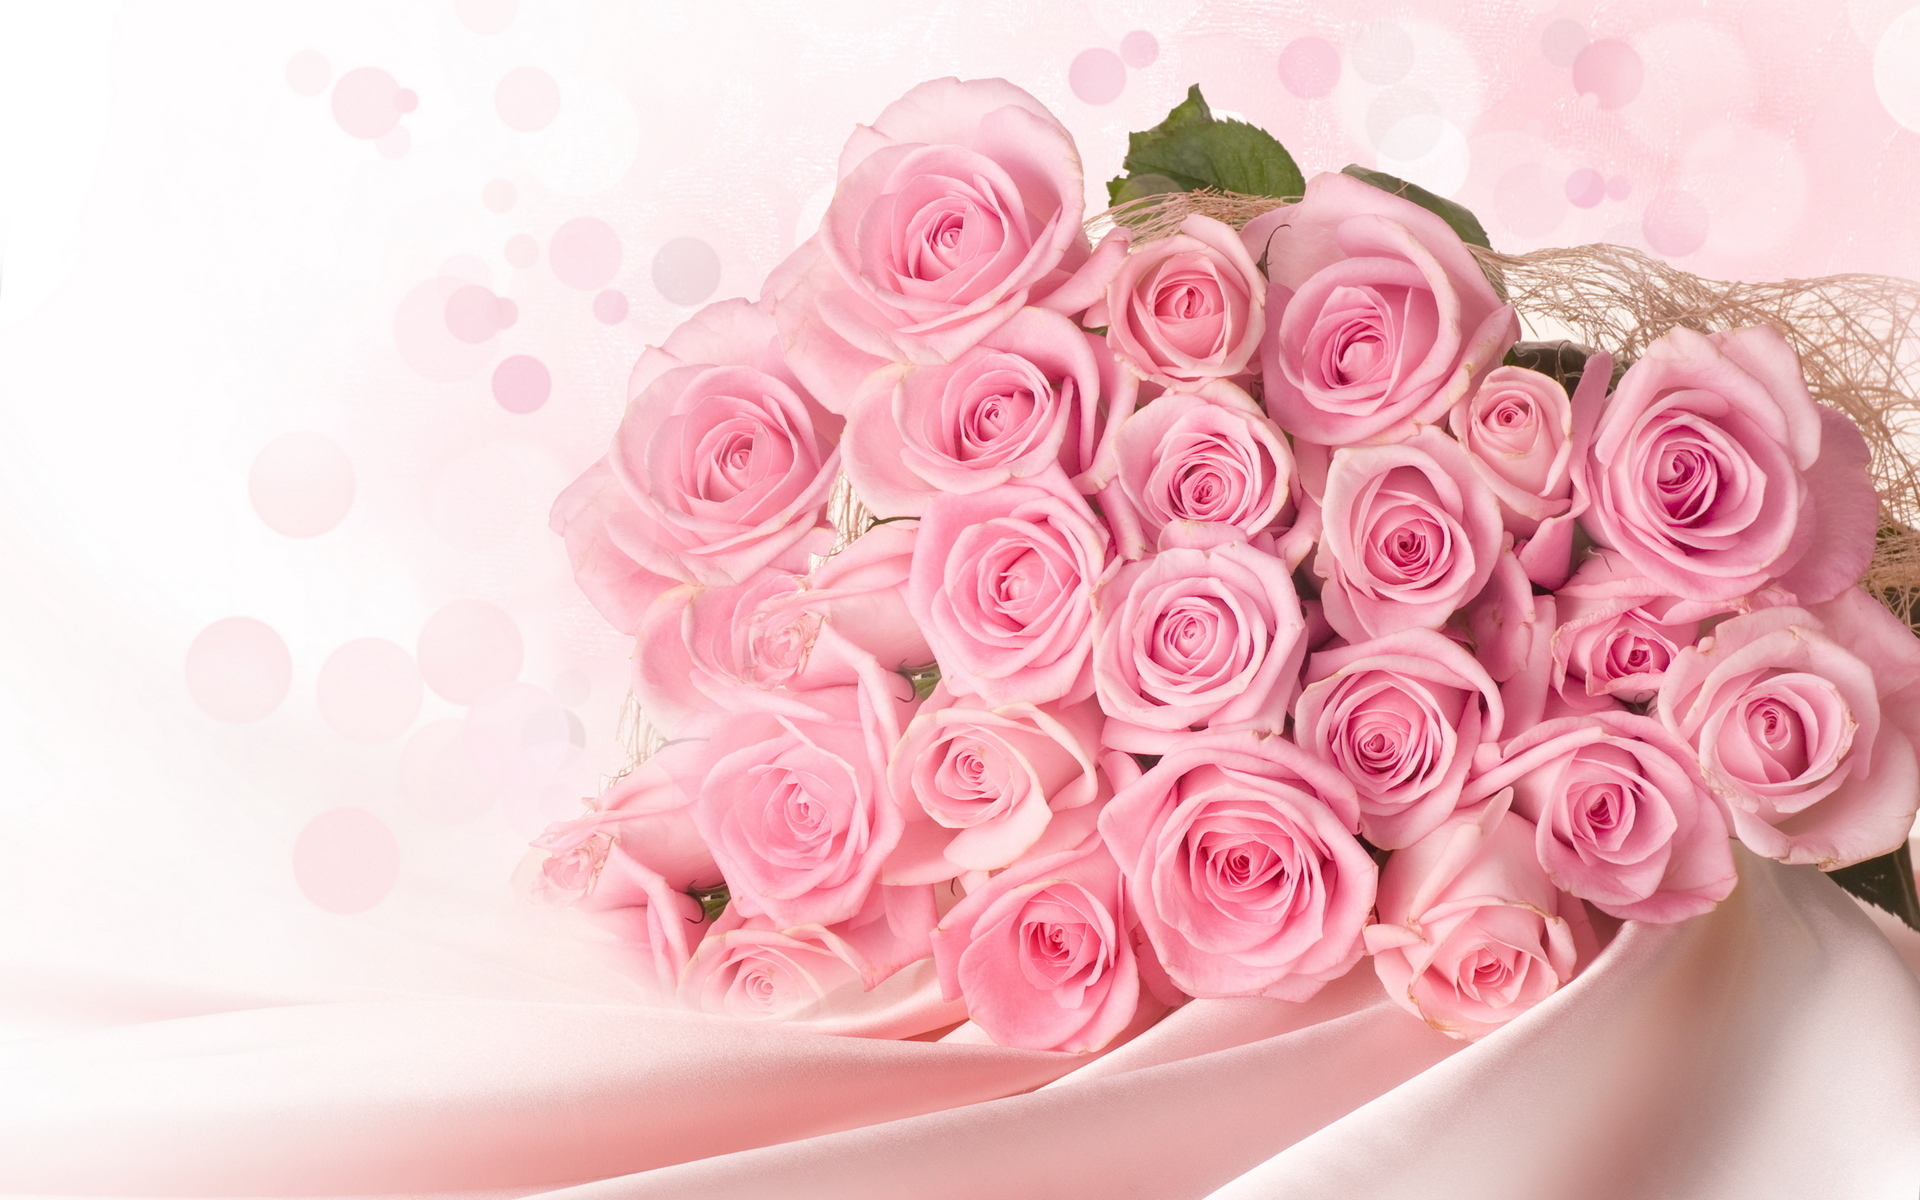 Pink Roses Background   Wallpaper High Definition High Quality